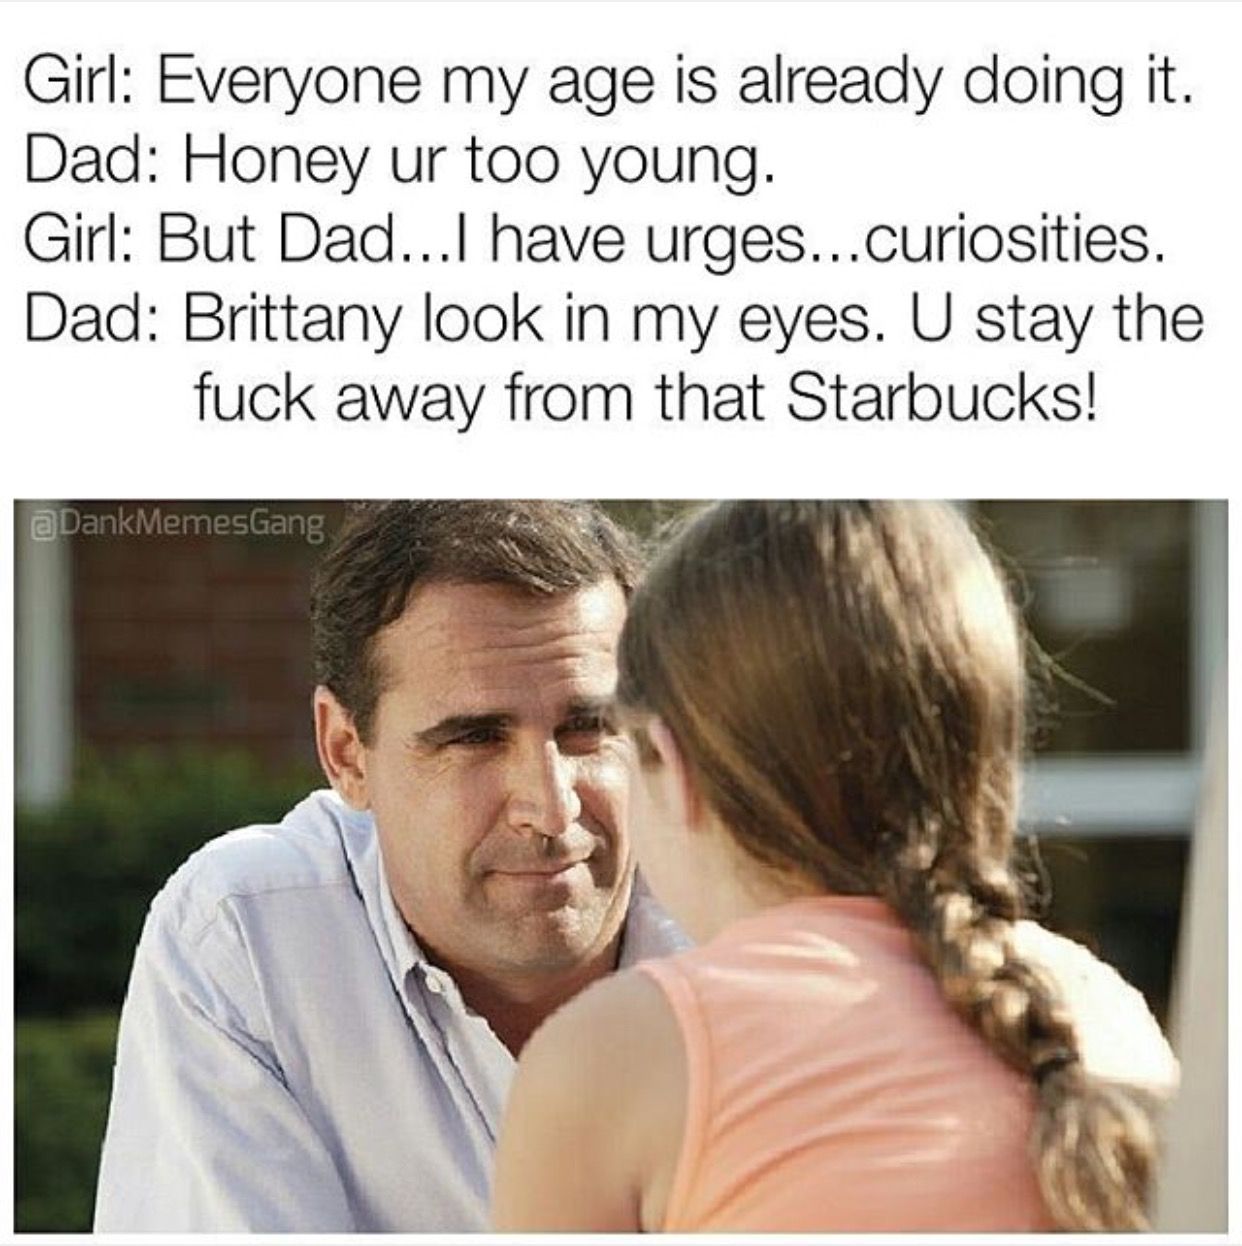 father and daughter conversation - Girl Everyone my age is already doing it. Dad Honey ur too young. Girl But Dad...l have urges...curiosities. Dad Brittany look in my eyes. U stay the fuck away from that Starbucks! a Dank MemesGang